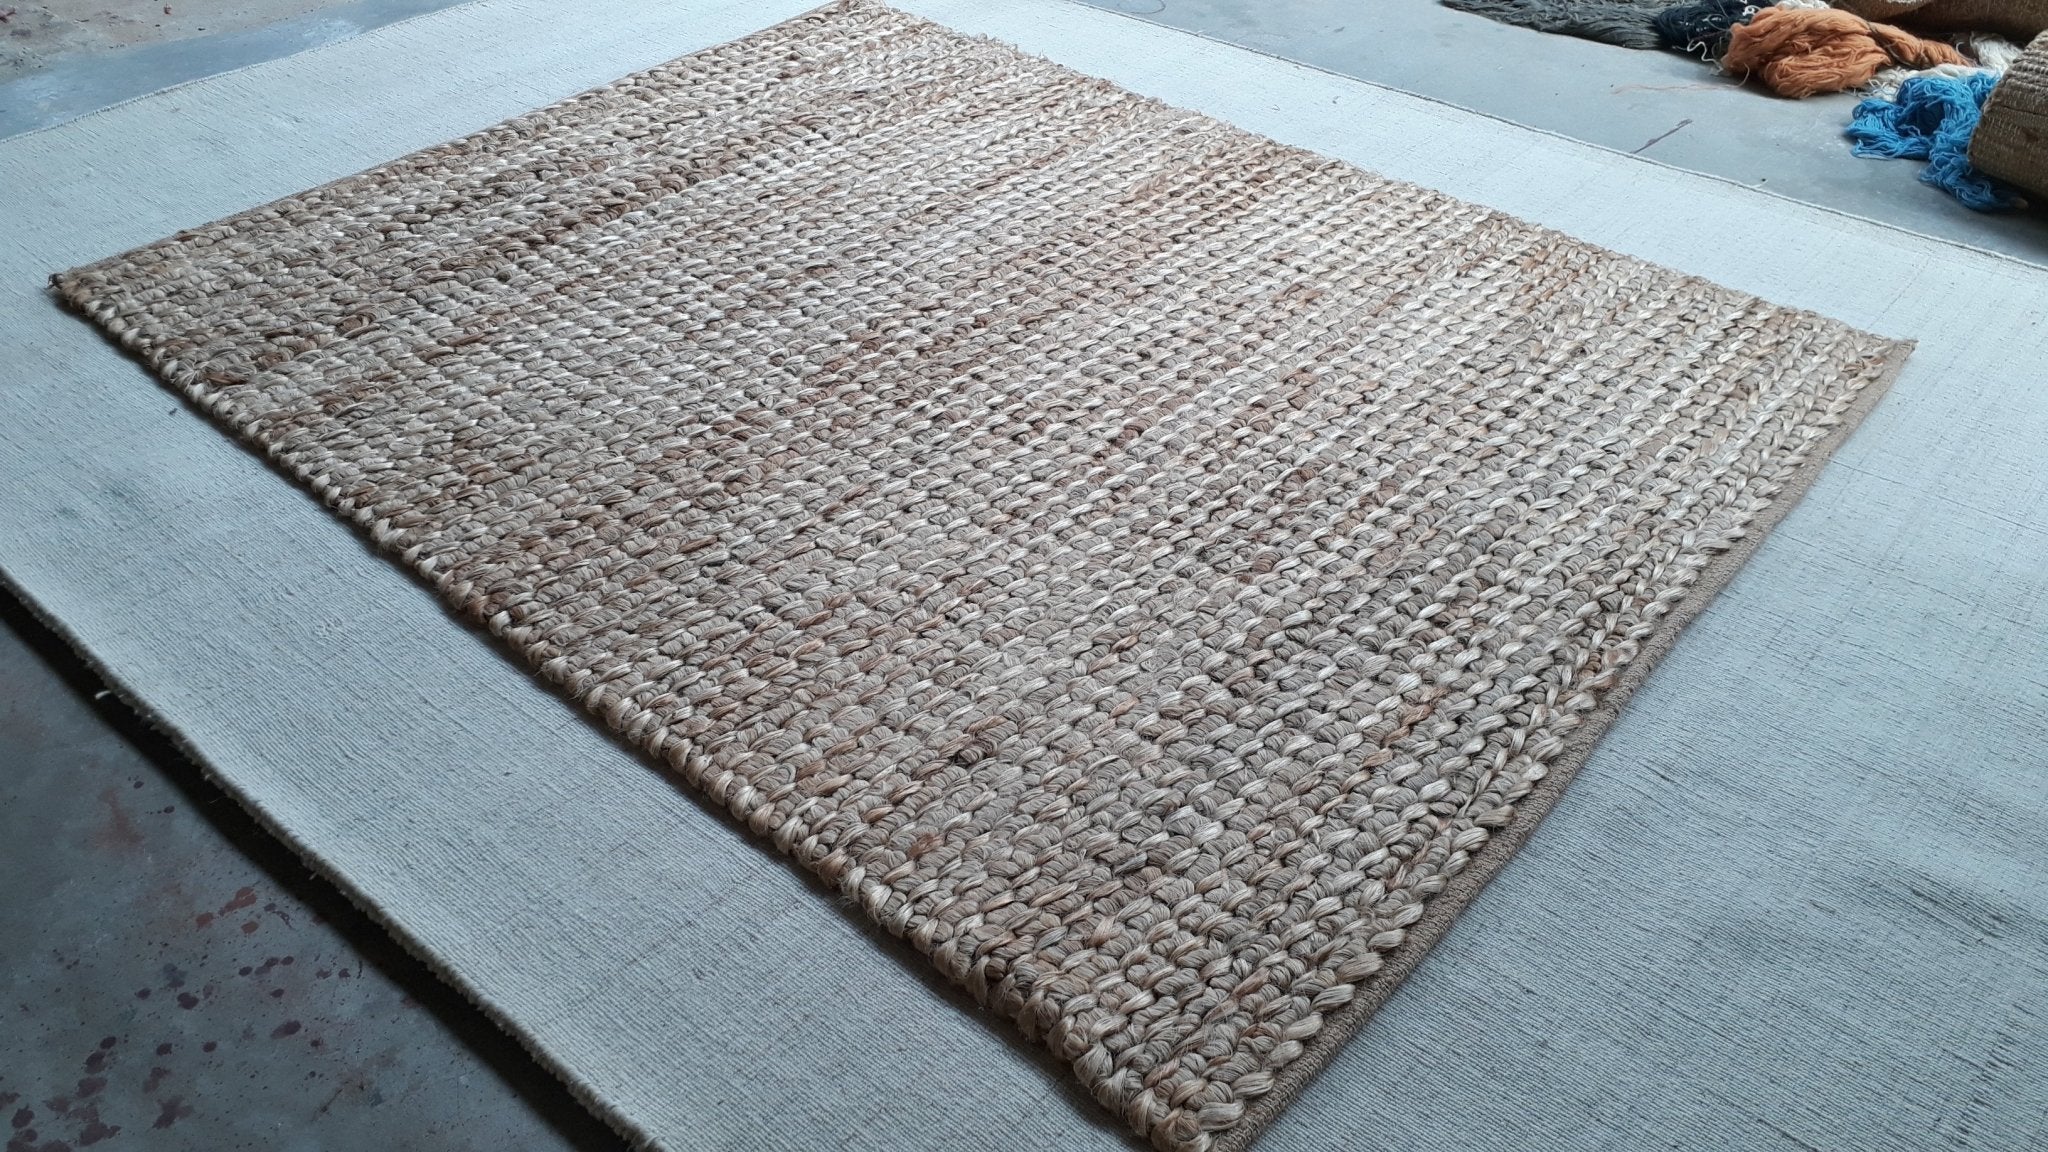 Muscles from Brussels Handwoven Flatweave Rug | Banana Manor Rug Company